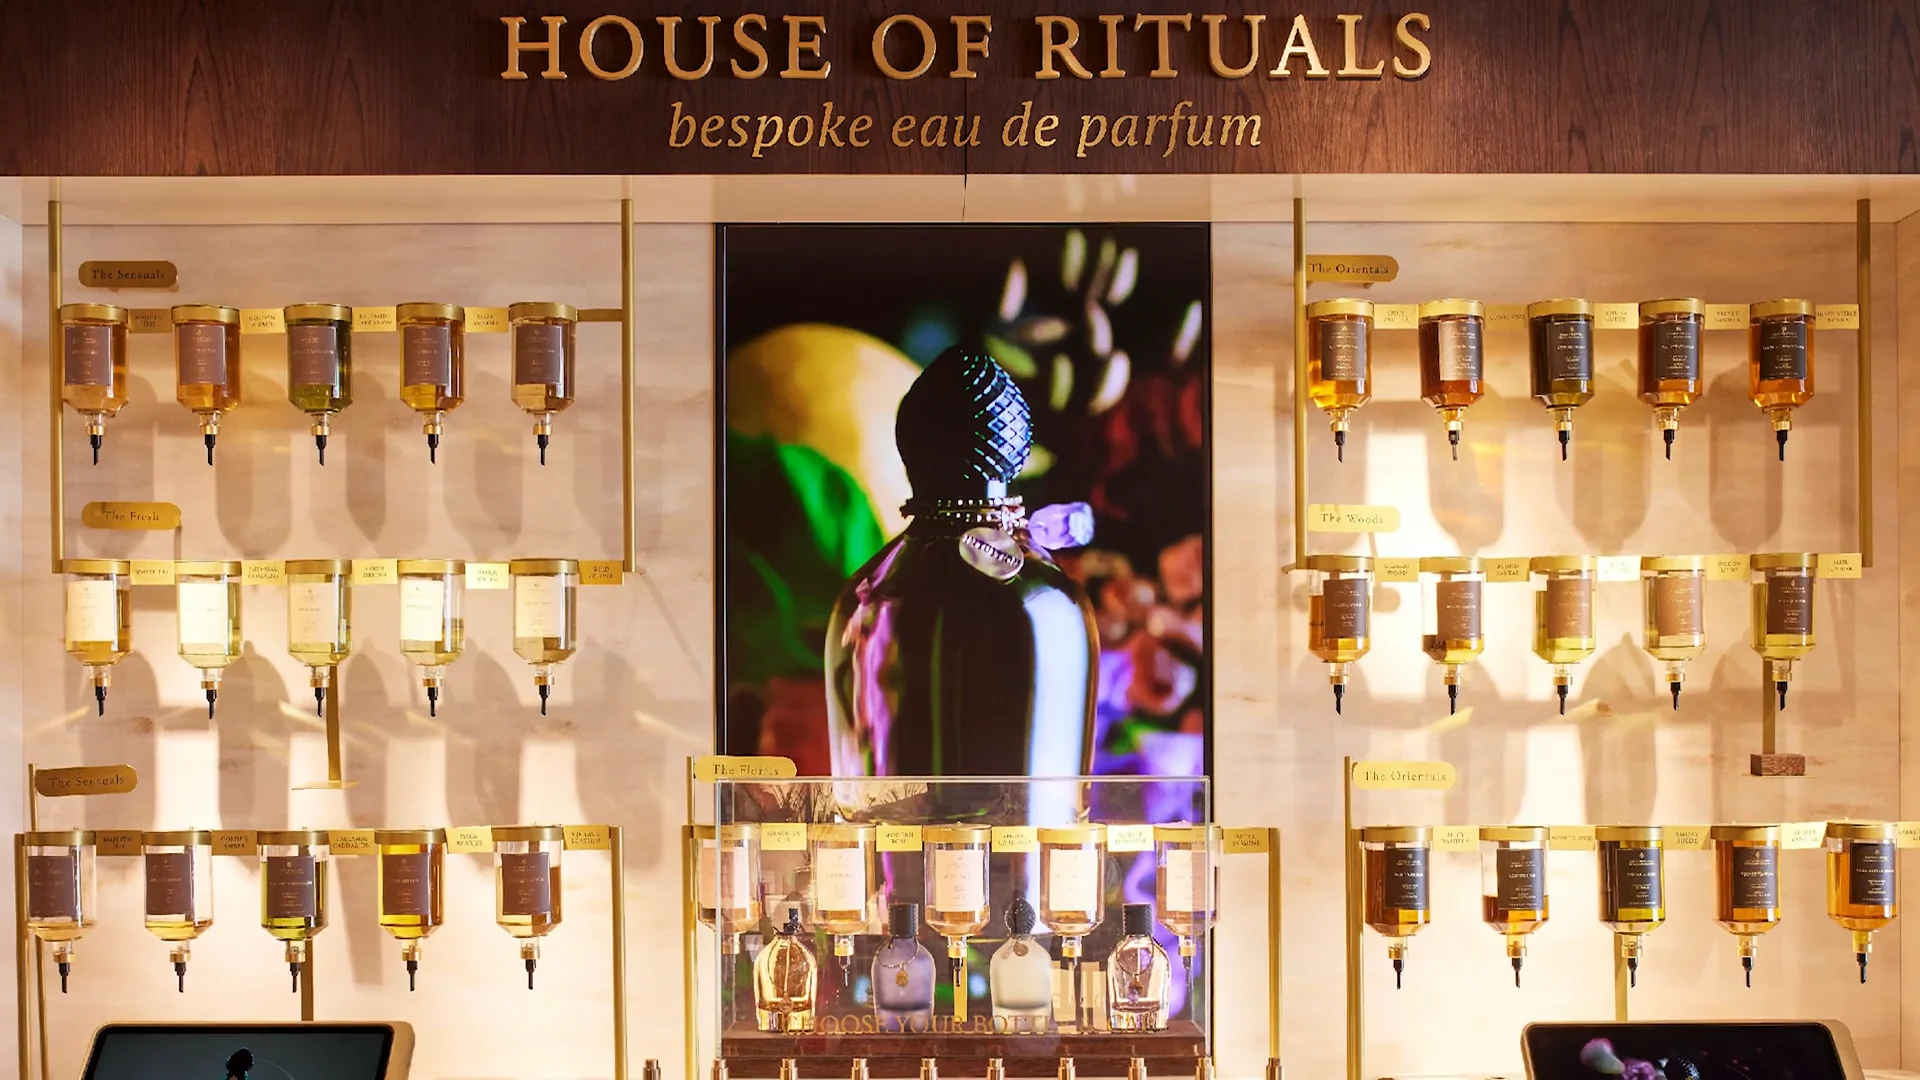 House Of Rituals Foto s House of Rituals Bespoke Perfume Bar Powered by BrightSign on Vimeo